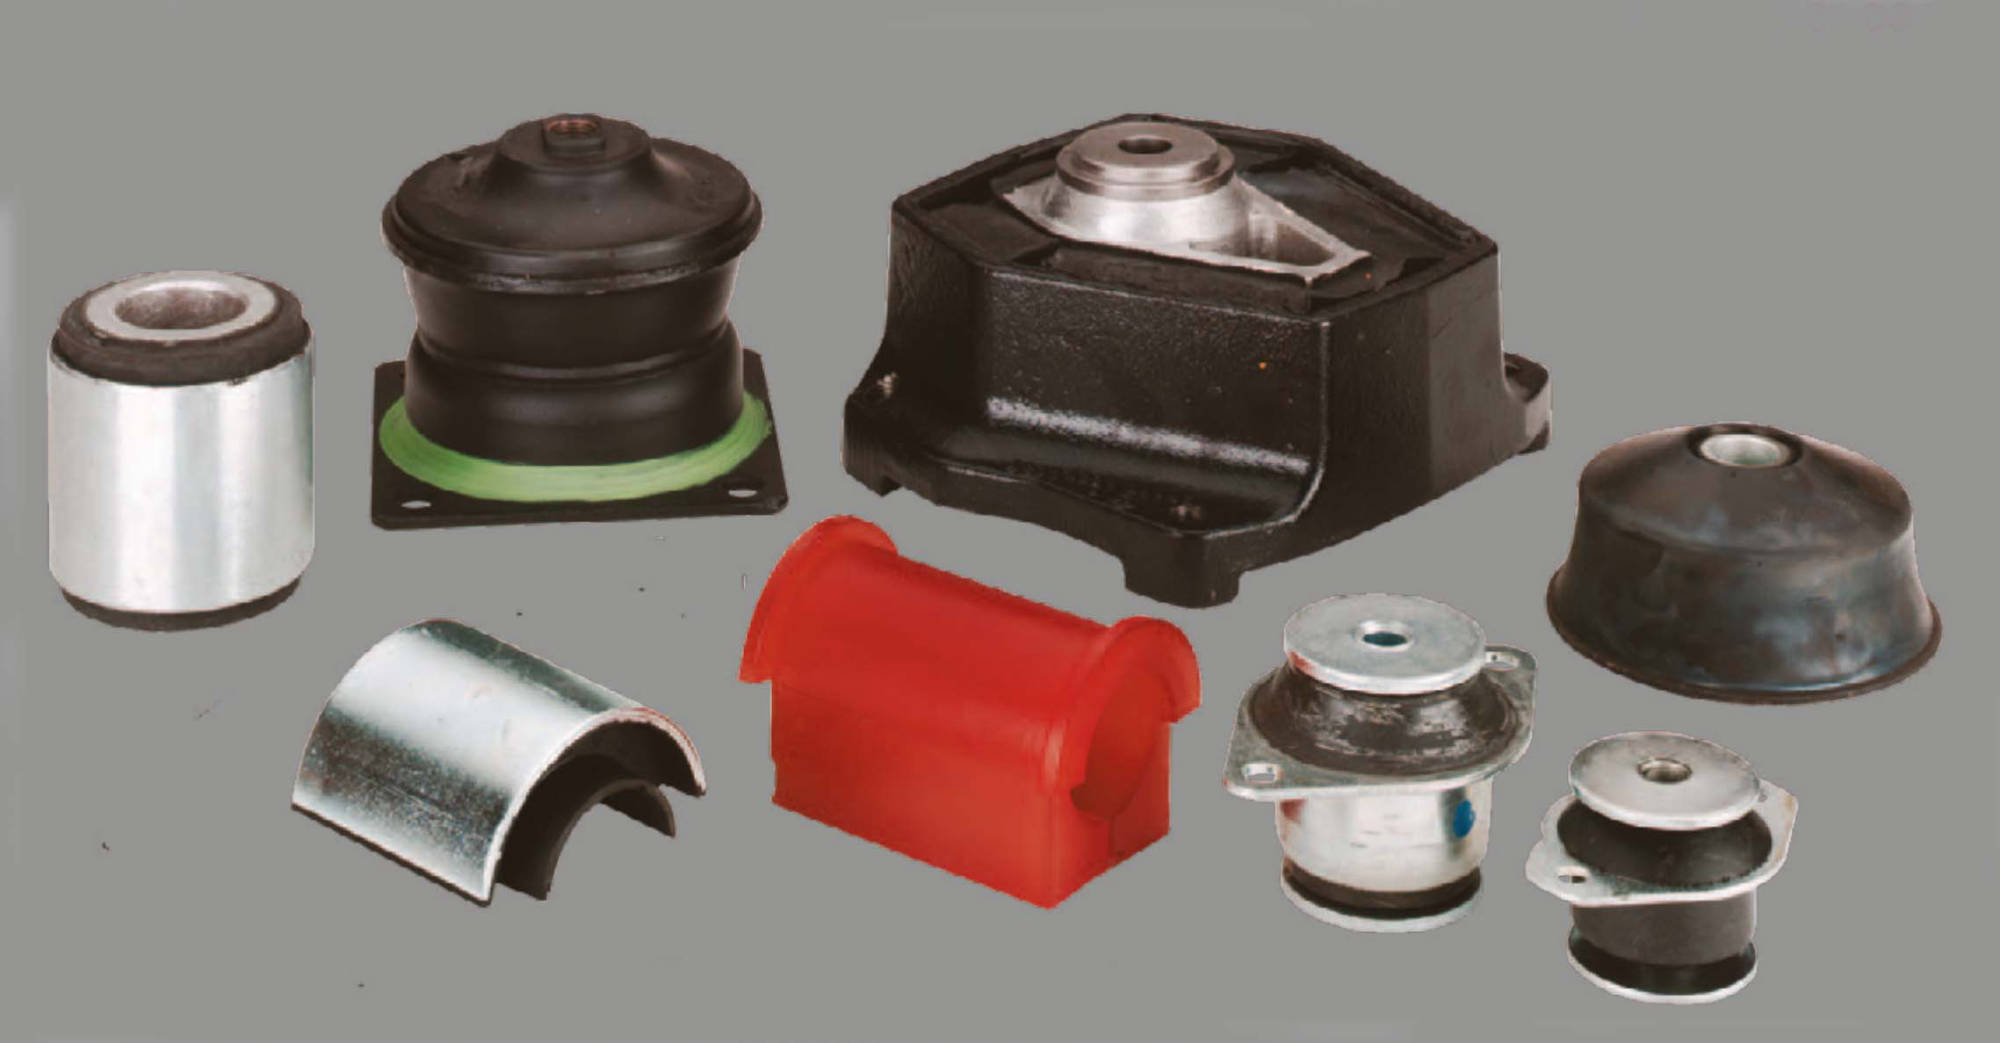  Antivibration Systems and Supports, Joints and Elastic Suspension for Trucks and Buses 